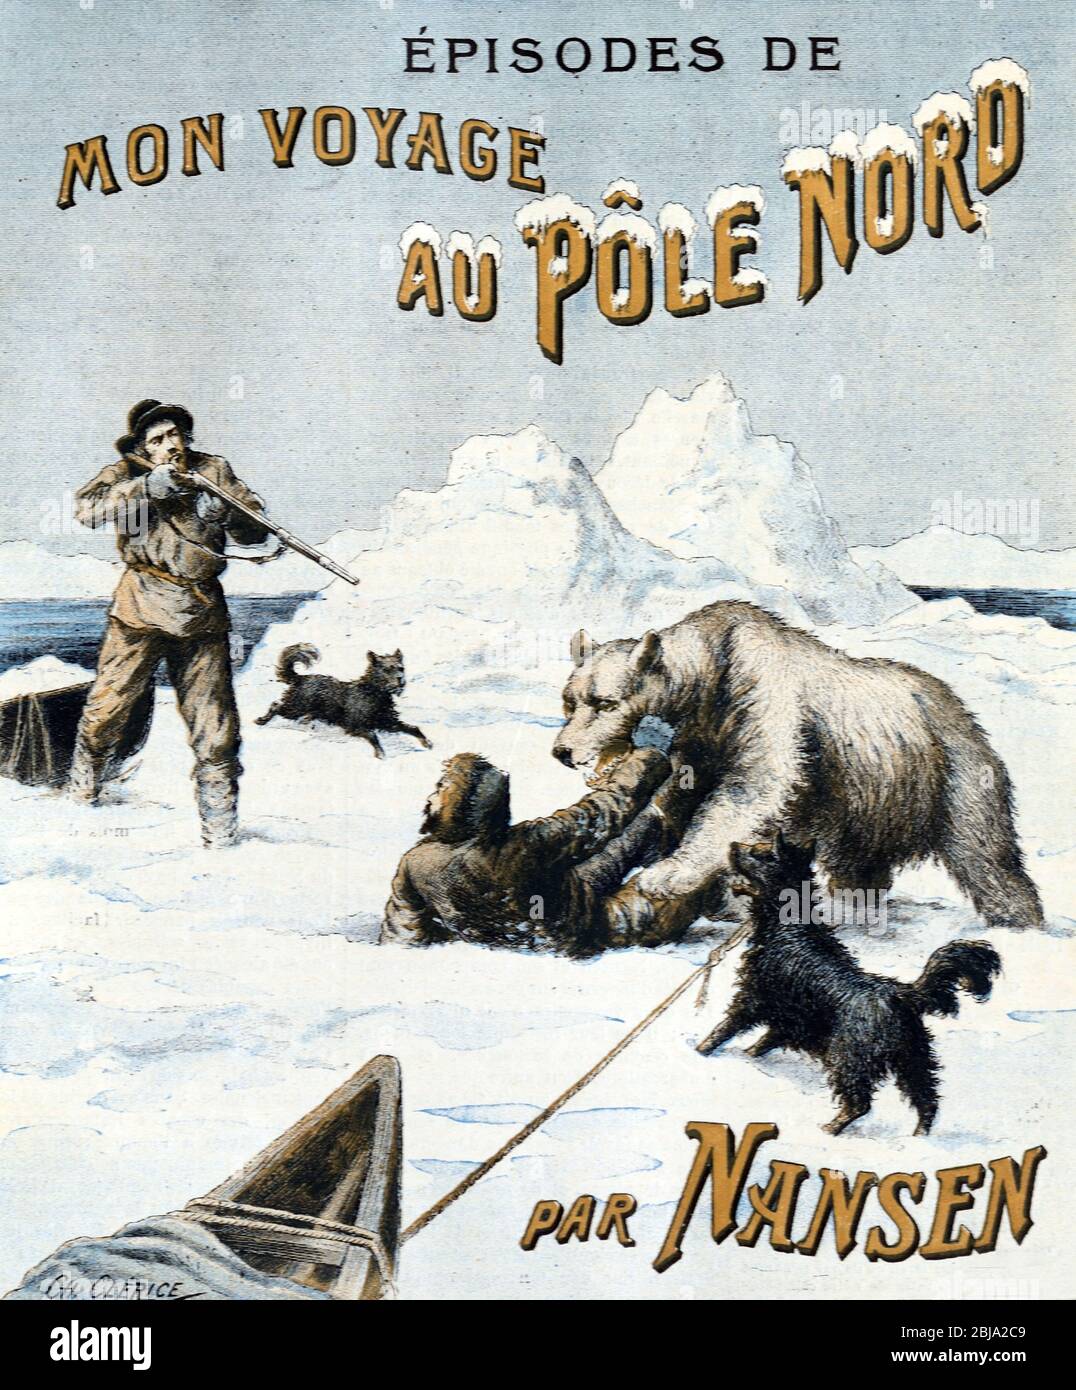 Front Cover of Book by Fridtjof Nansen 'My Travels to the North Pole. The Cover Shows a Polar Bear Attacking An Explorer fom Nansen's Team. 1897. Stock Photo